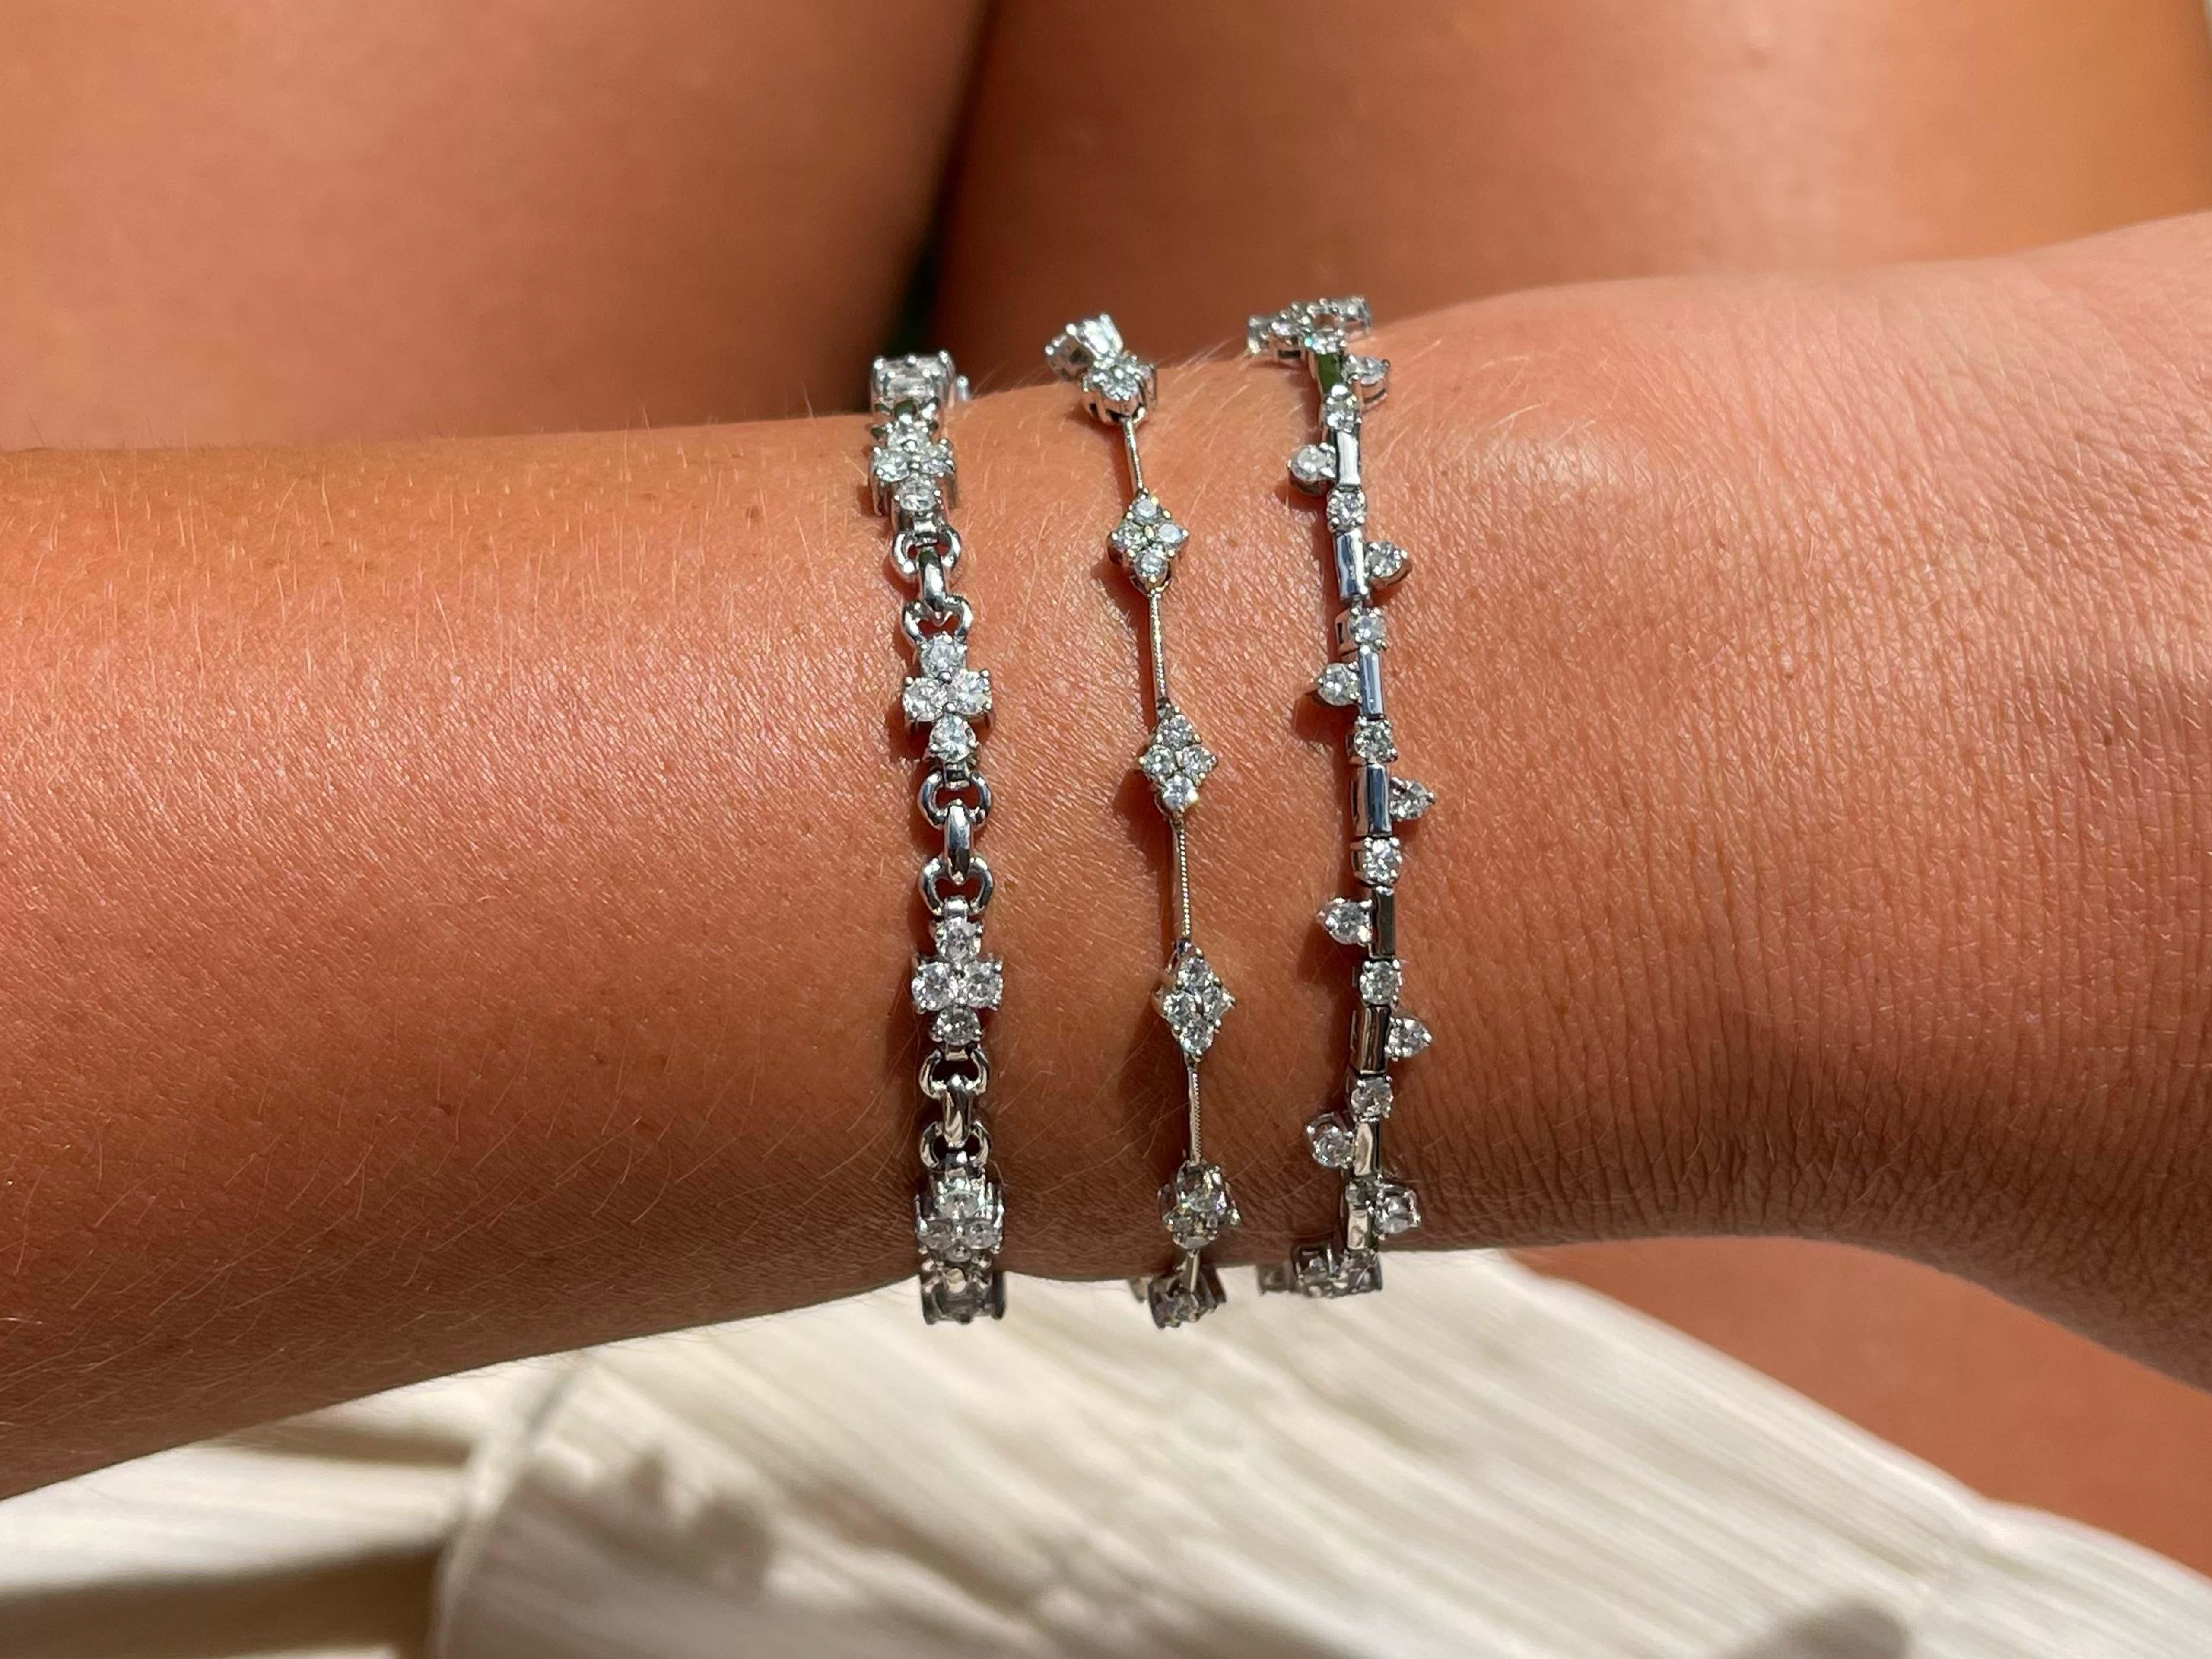 Bracelet Specifications:

Metal: 14k White Gold

Diamond Count: 53

Diamond Carat Weight: 2.6

Diamond Color: H-I

Diamond Clarity: SI

Bracelet Length: ~7.10 inches

Bracelet Width: ~ 6 mm

Total Weight: 9.2 Grams

Condition: Vintage,